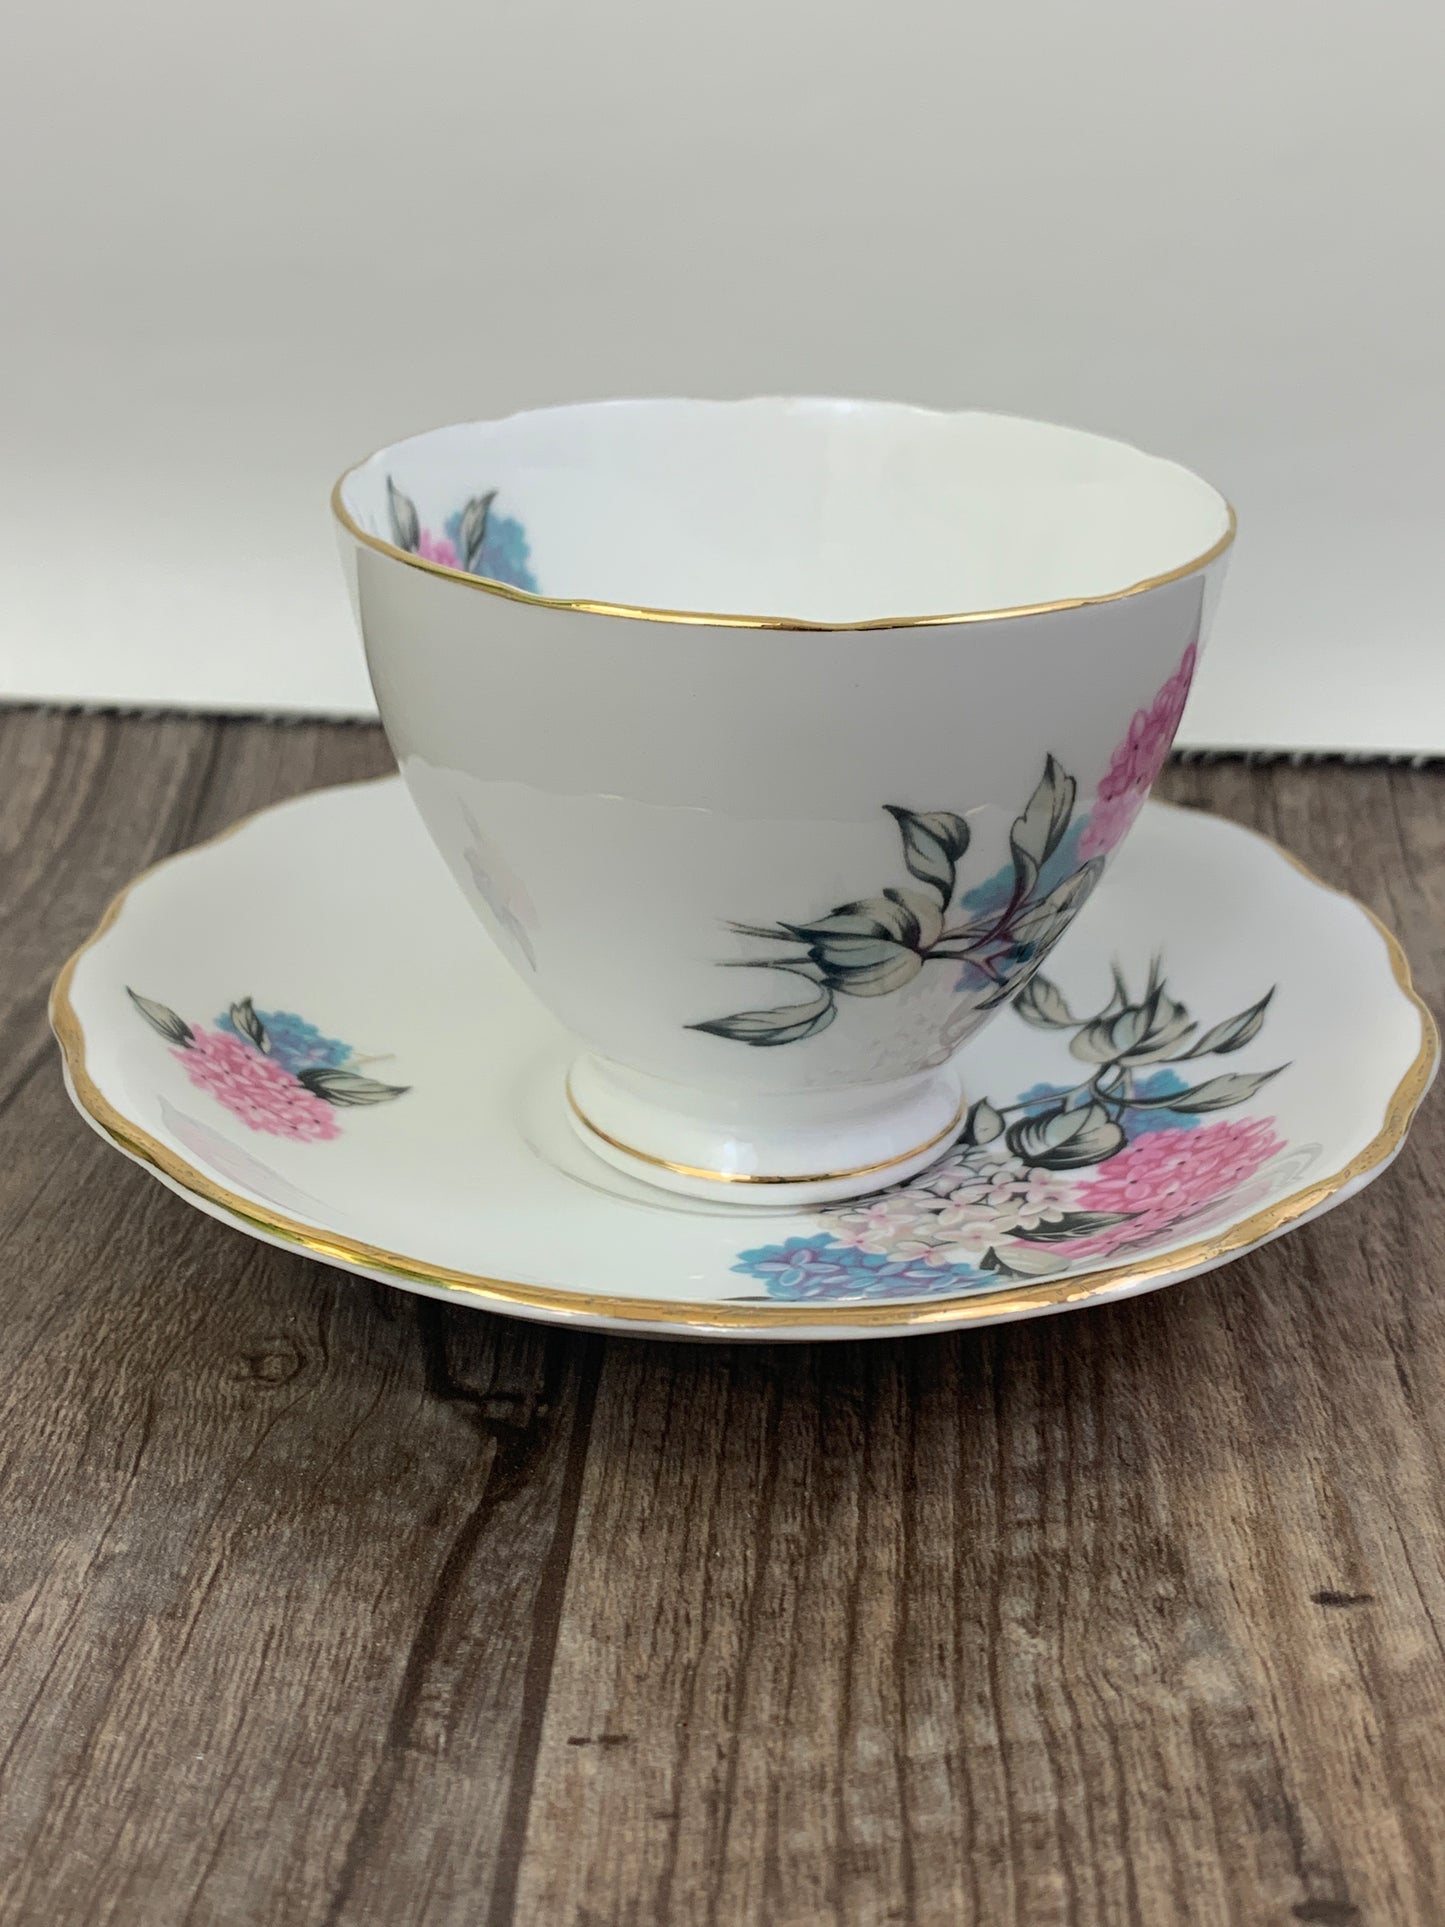 Vintage Teacup with Pink and Blue Hydrangeas